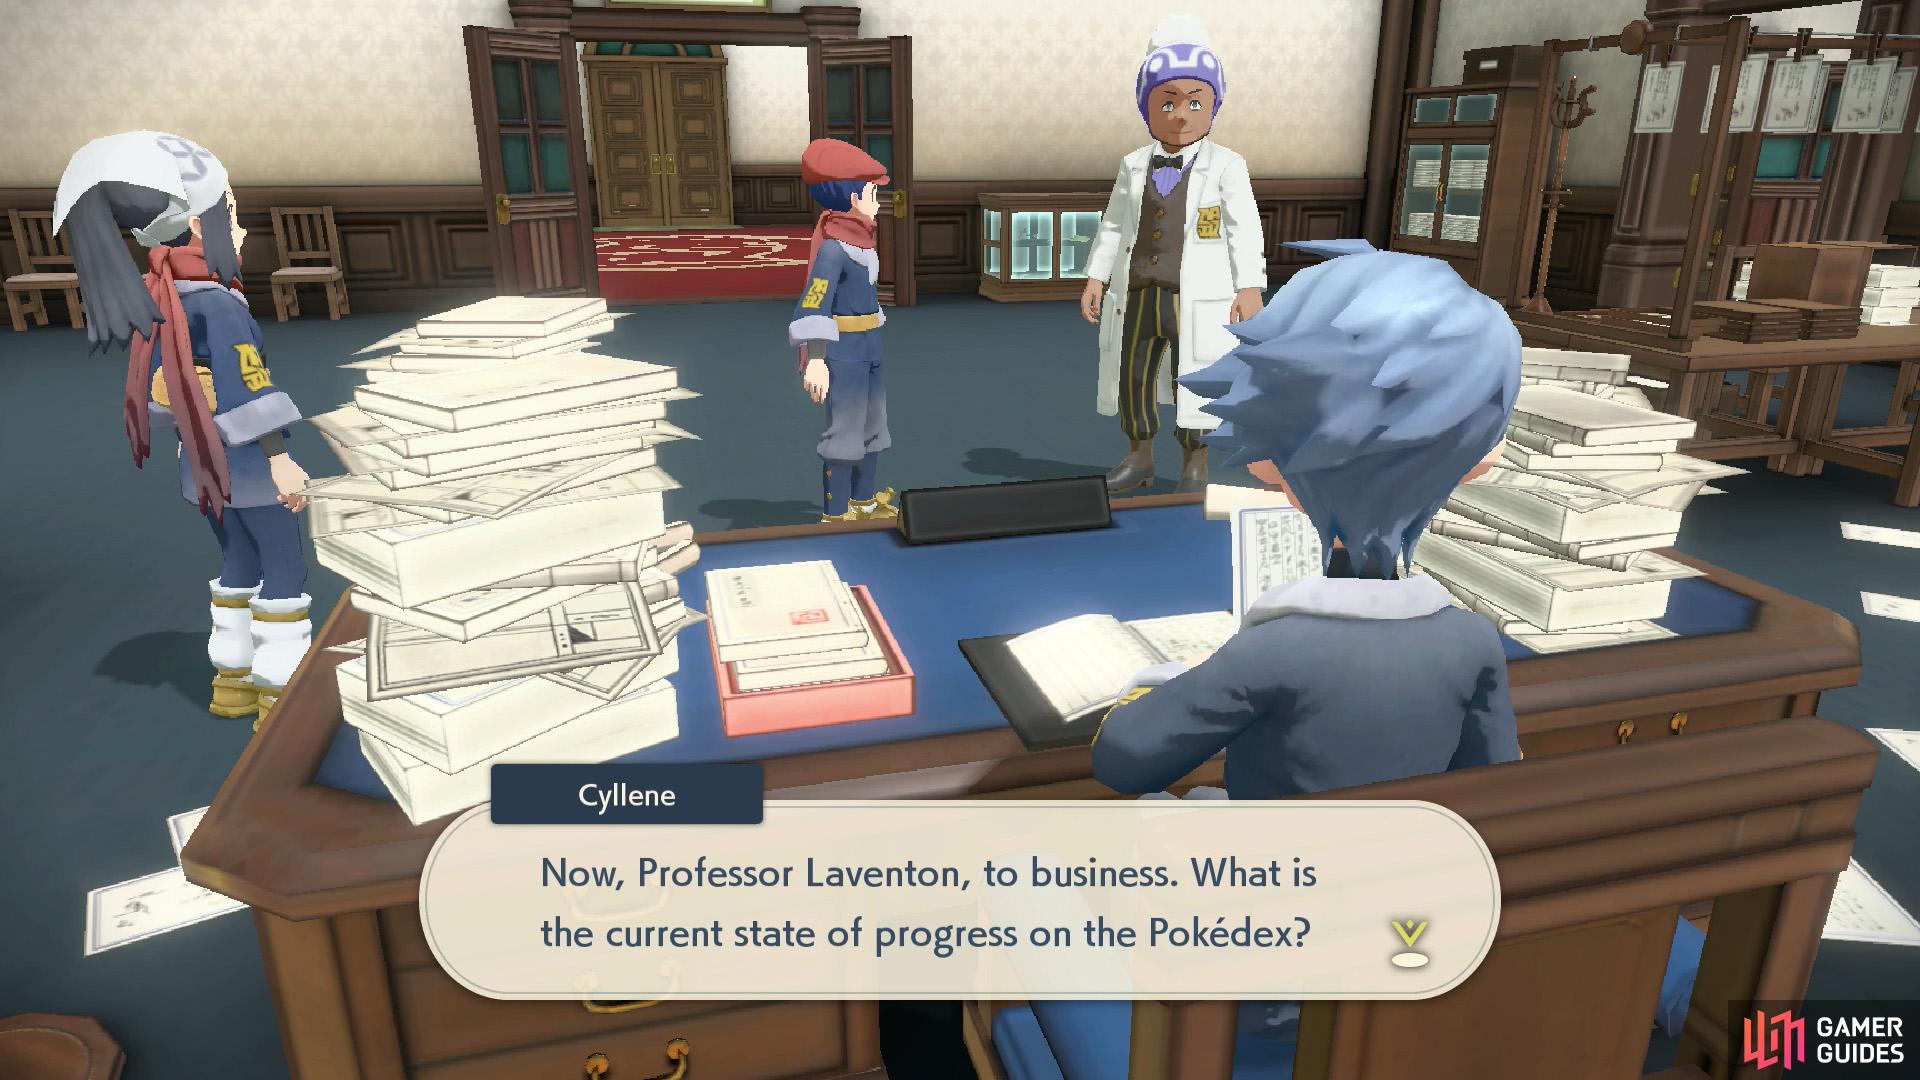 In case you forgot, filling in the Pokédex is a key responsibility for the Survey Corps.